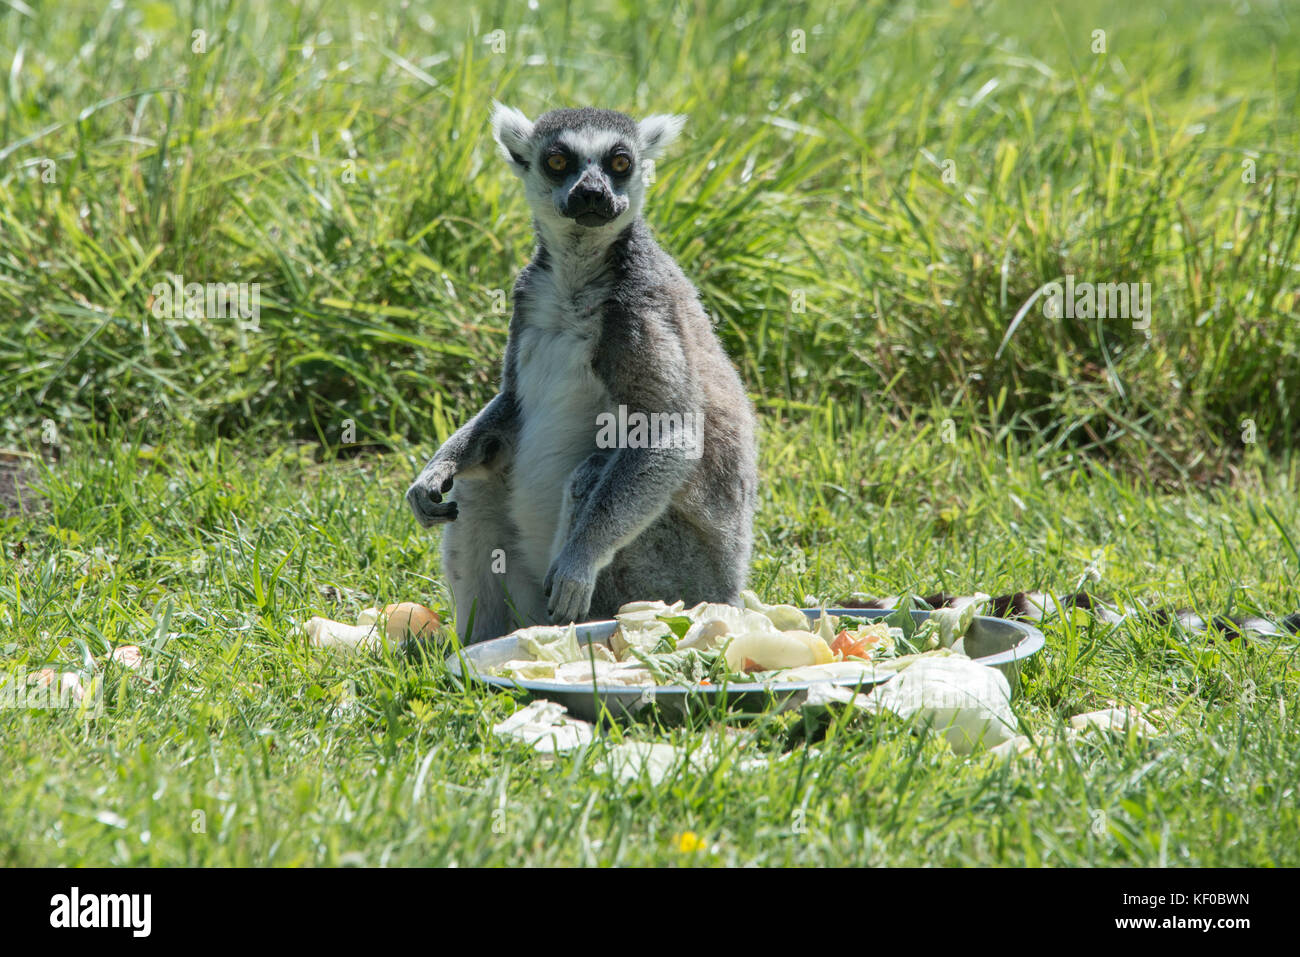 Ringtailed lemur at feeding time in a wildlife park Stock Photo